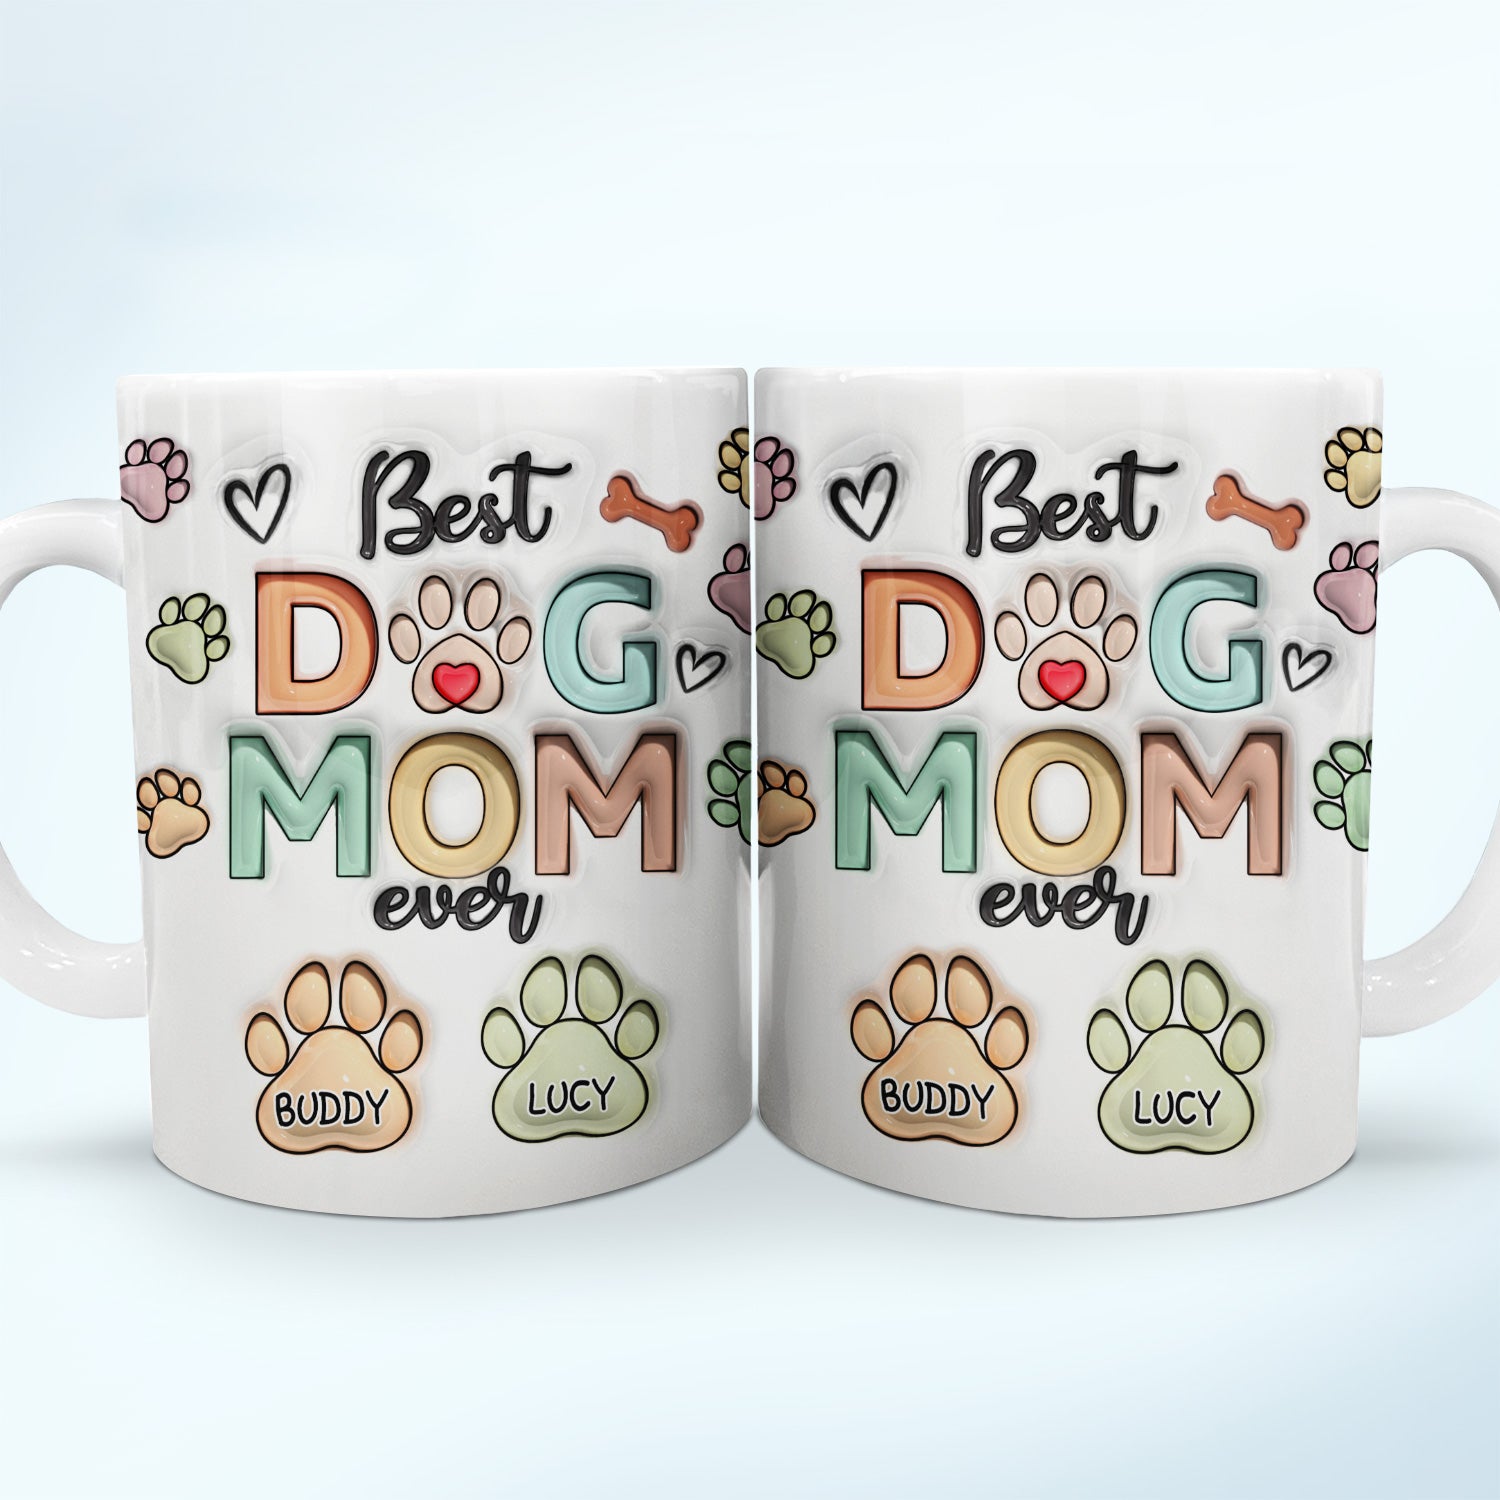 Best Dog Mom Ever - Birthday, Anniversary Gift For Dog Dad, Cat Mom, Pet Lover -  3D Inflated Effect Printed Mug, Personalized White Edge-to-Edge Mug